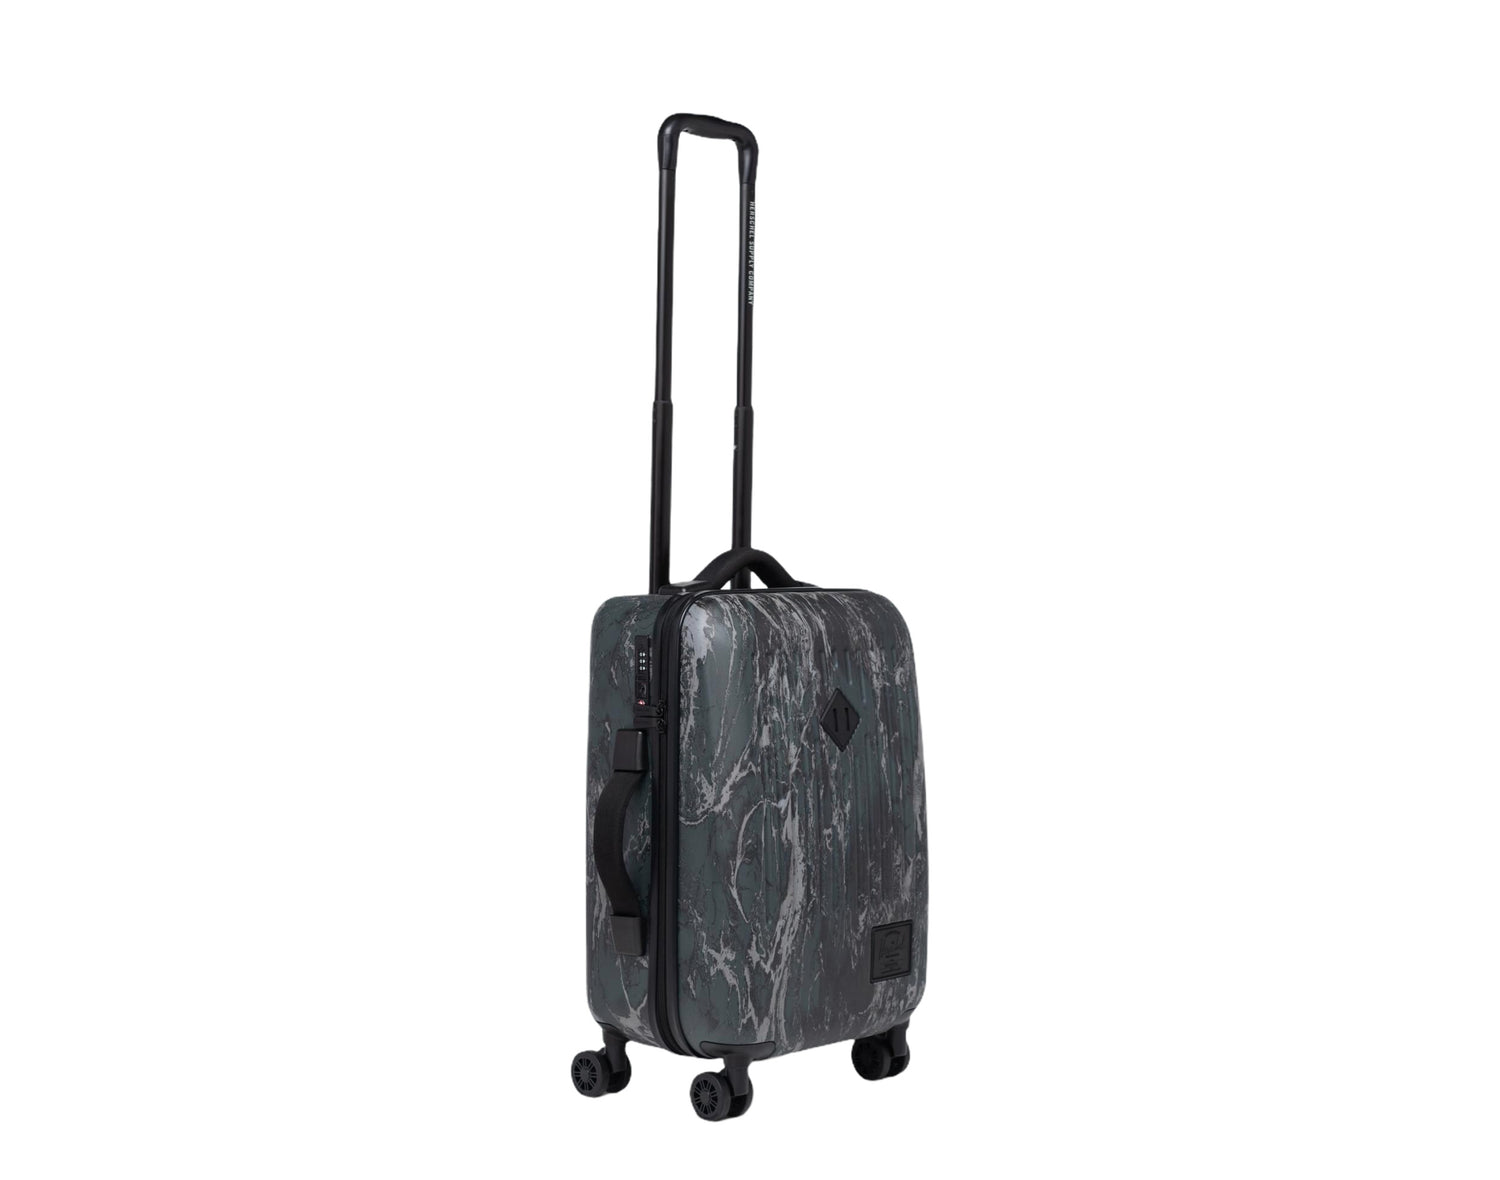 Herschel Supply Co. Trade Carry-On Large Hard Shell Luggage - 40L